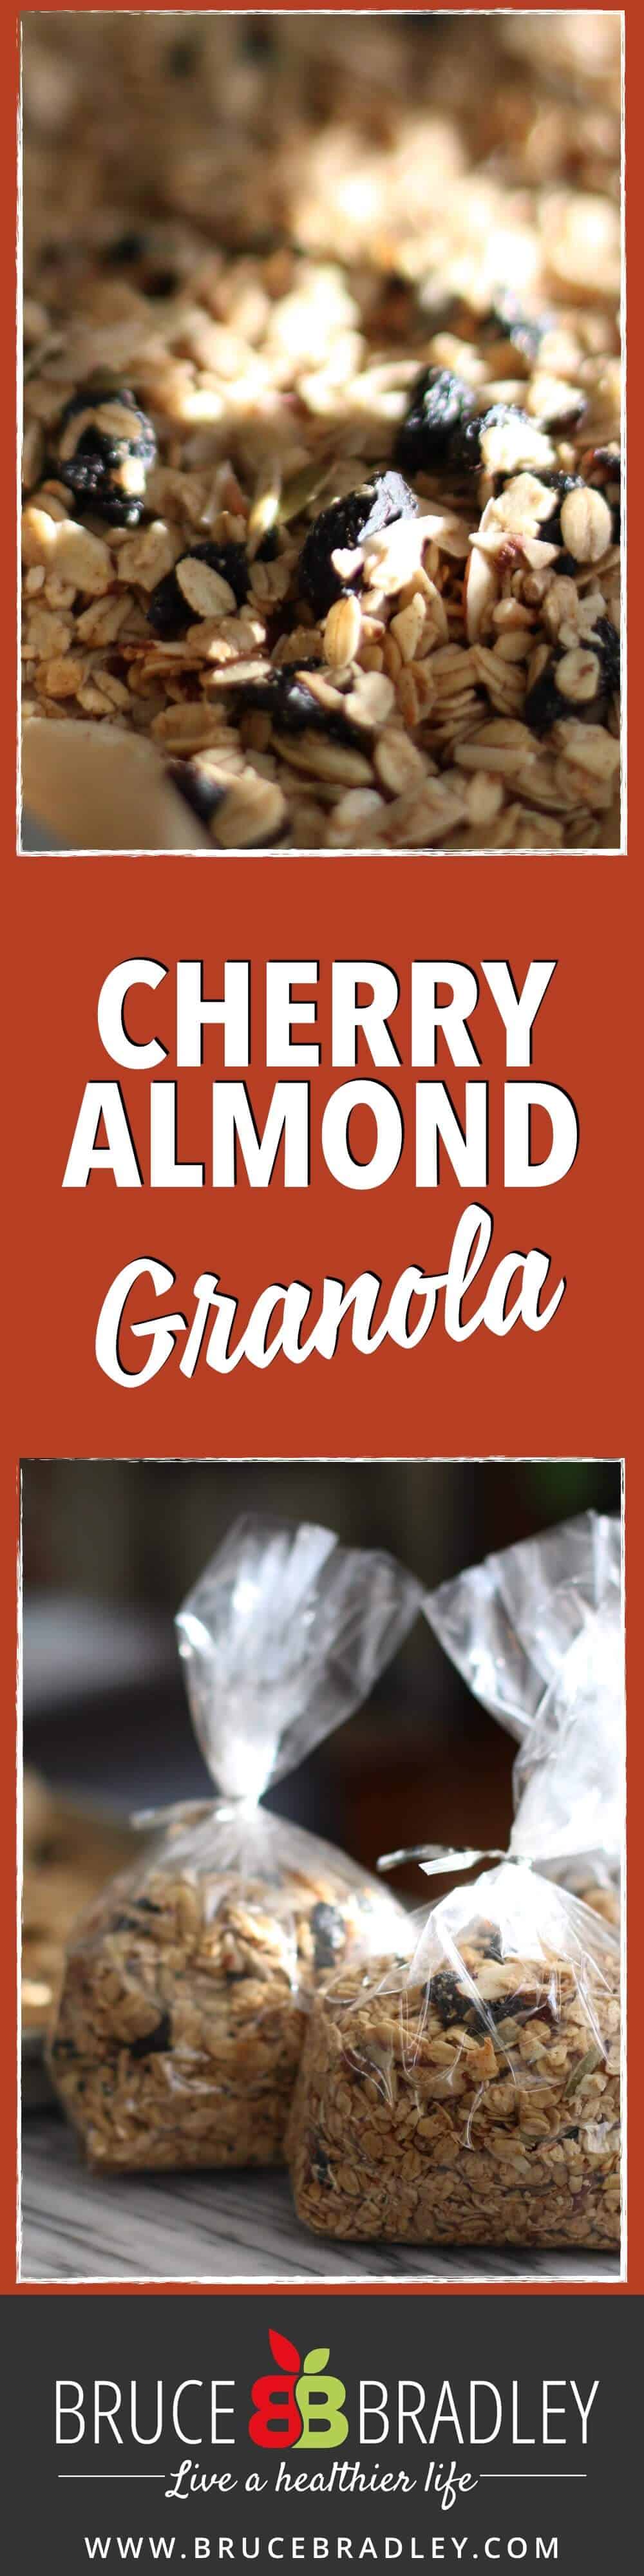 Perfect For An Everyday Breakfast, Snack, Or As A Holiday Gift, Bruce Bradley'S Cherry Almond Granola Is Delicious And Made With 100% Real Ingredients!